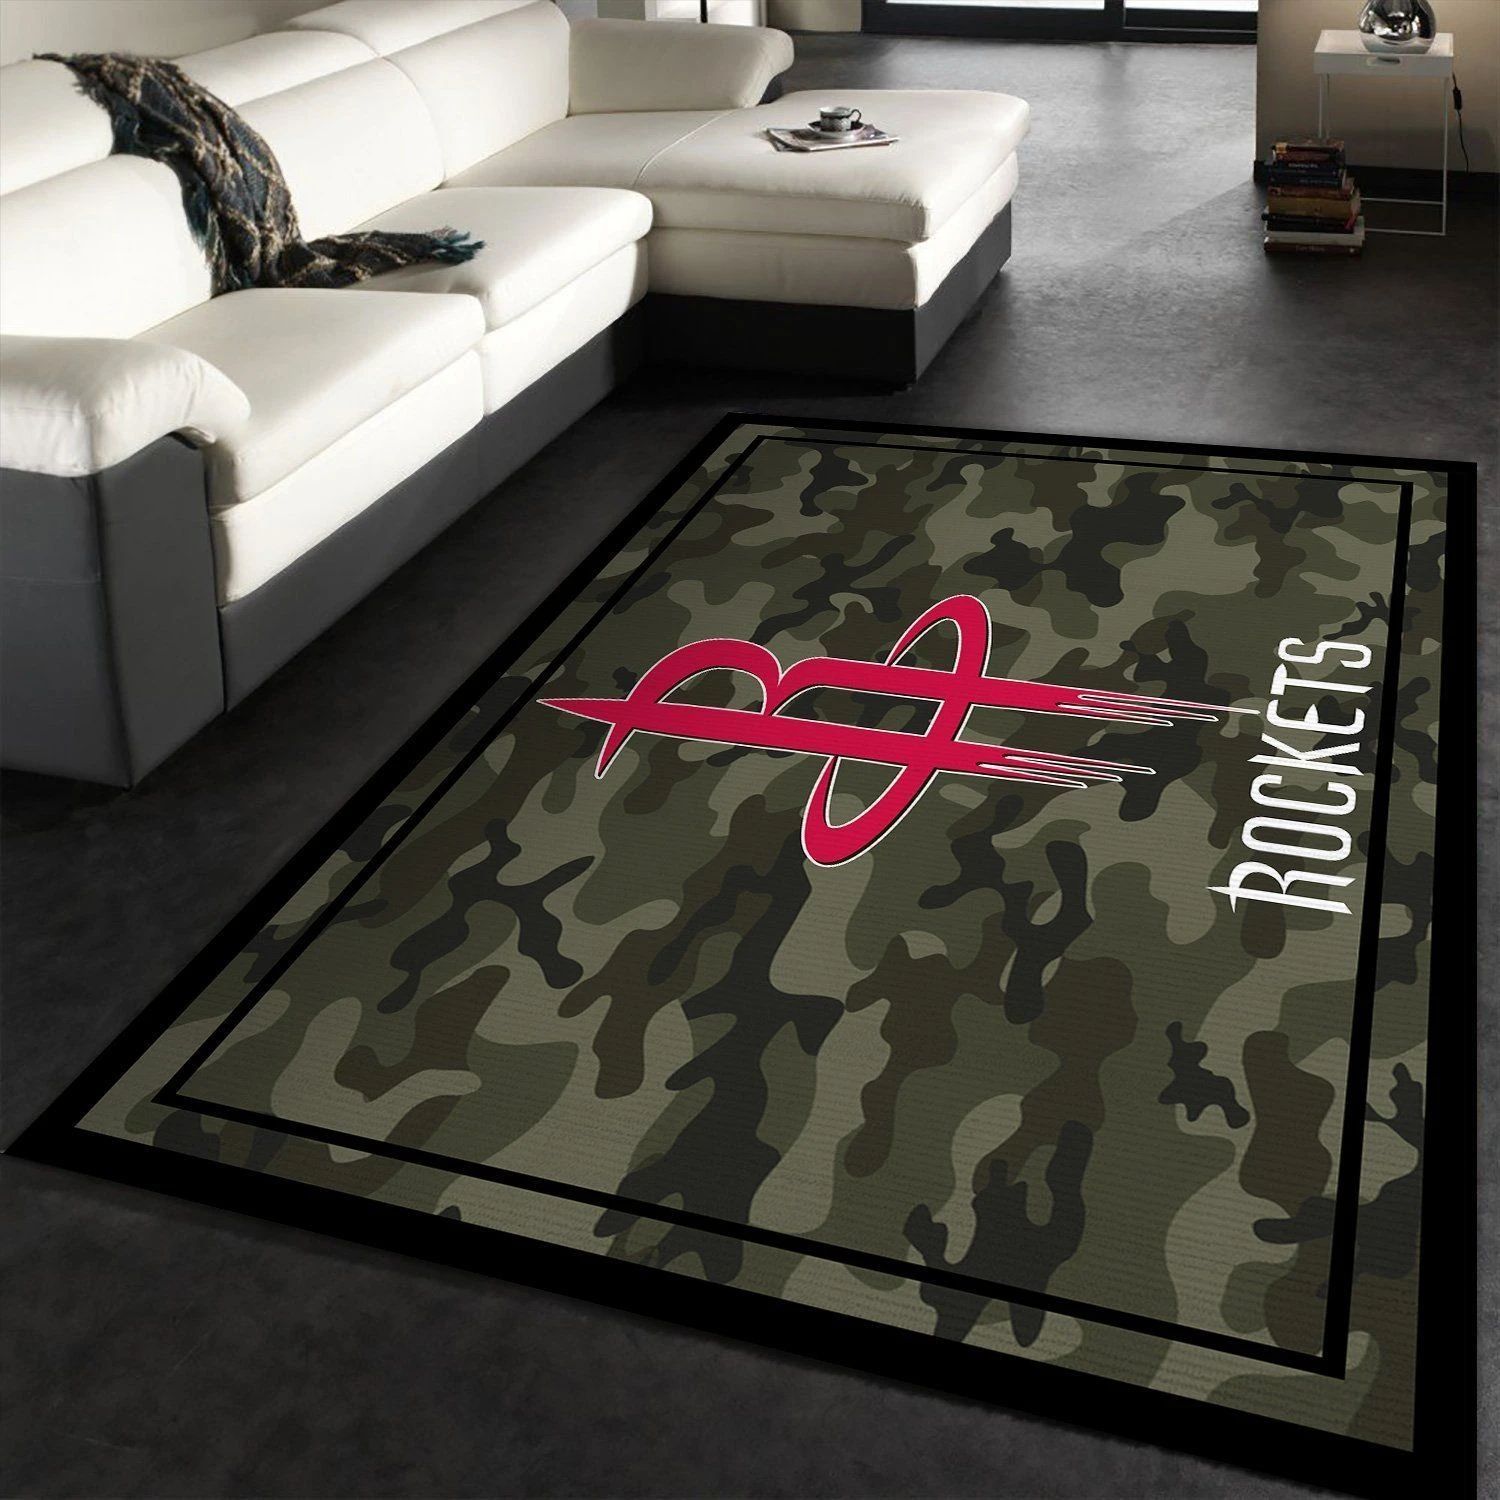 Houston Rockets Nba Team Logo Camo Style Nice Gift Home Decor Area Rug Rugs For Living Room - Indoor Outdoor Rugs 1